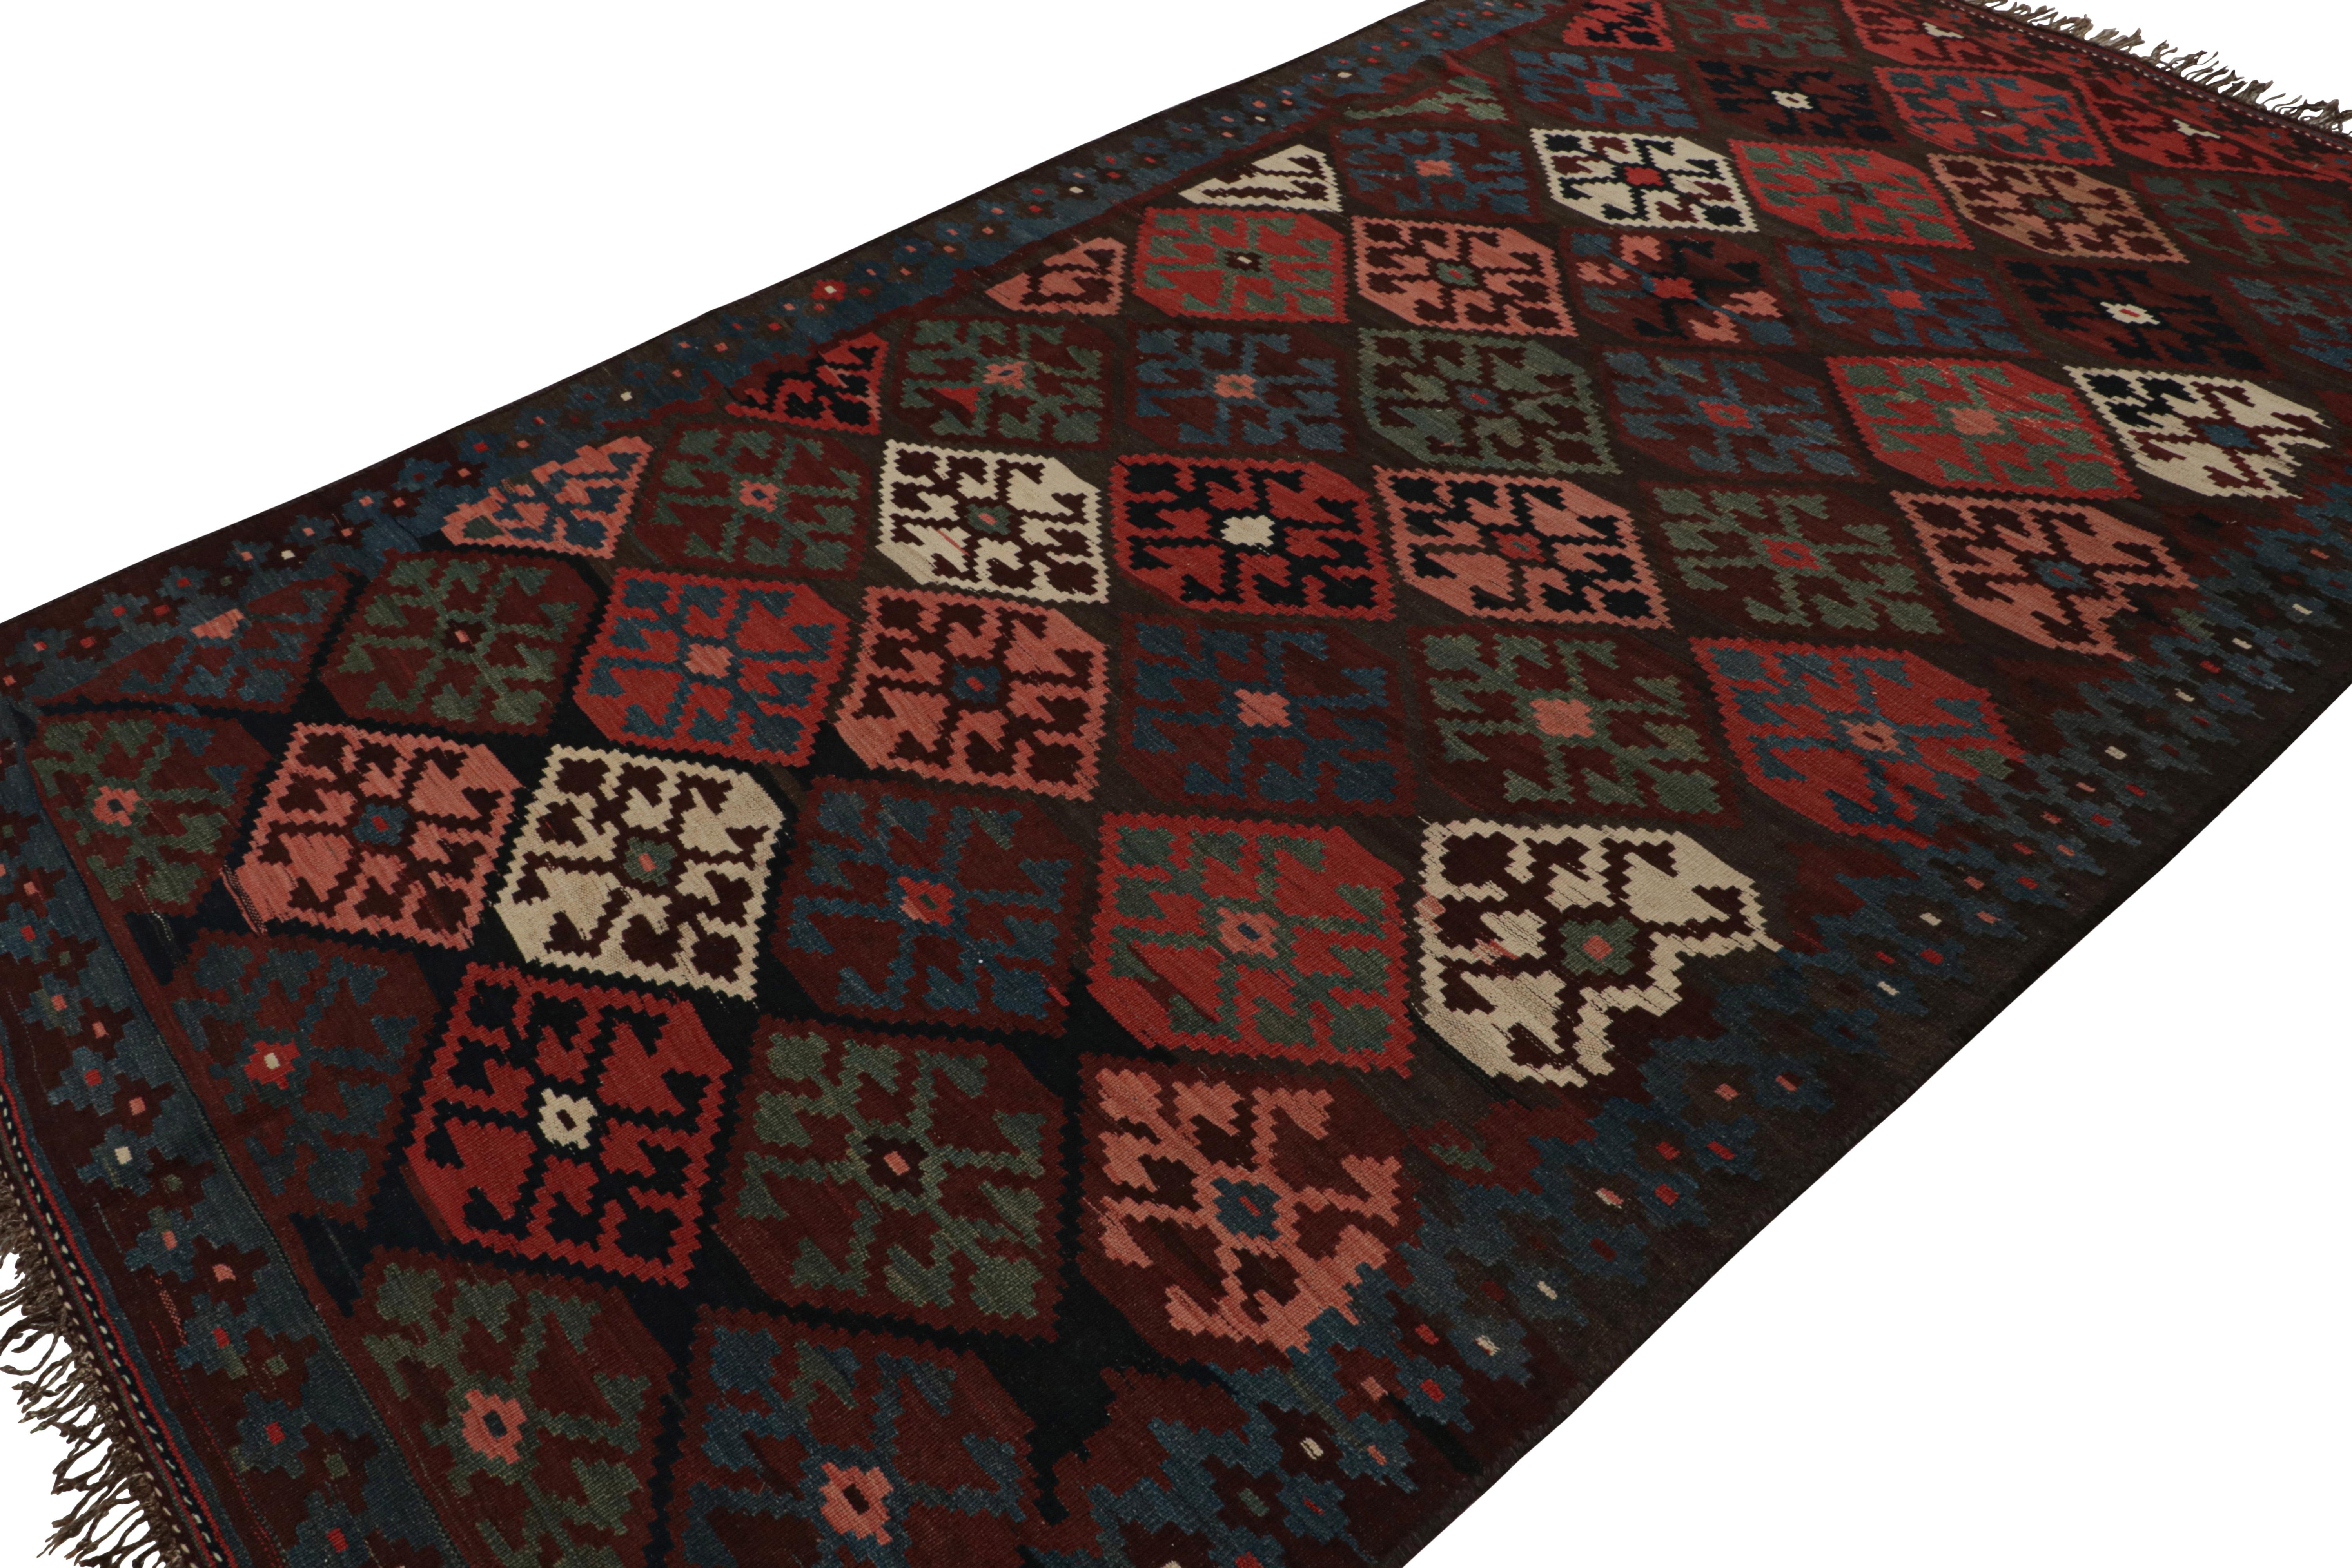 This vintage 7x11 Persian Kilim is the latest to join Rug & Kilim’s selection of vintage flatweaves. 

On the Design:

Handwoven in wool circa 1950-1960, the colorful piece is full of intricate, playful details. The play of red, blue-brown tones